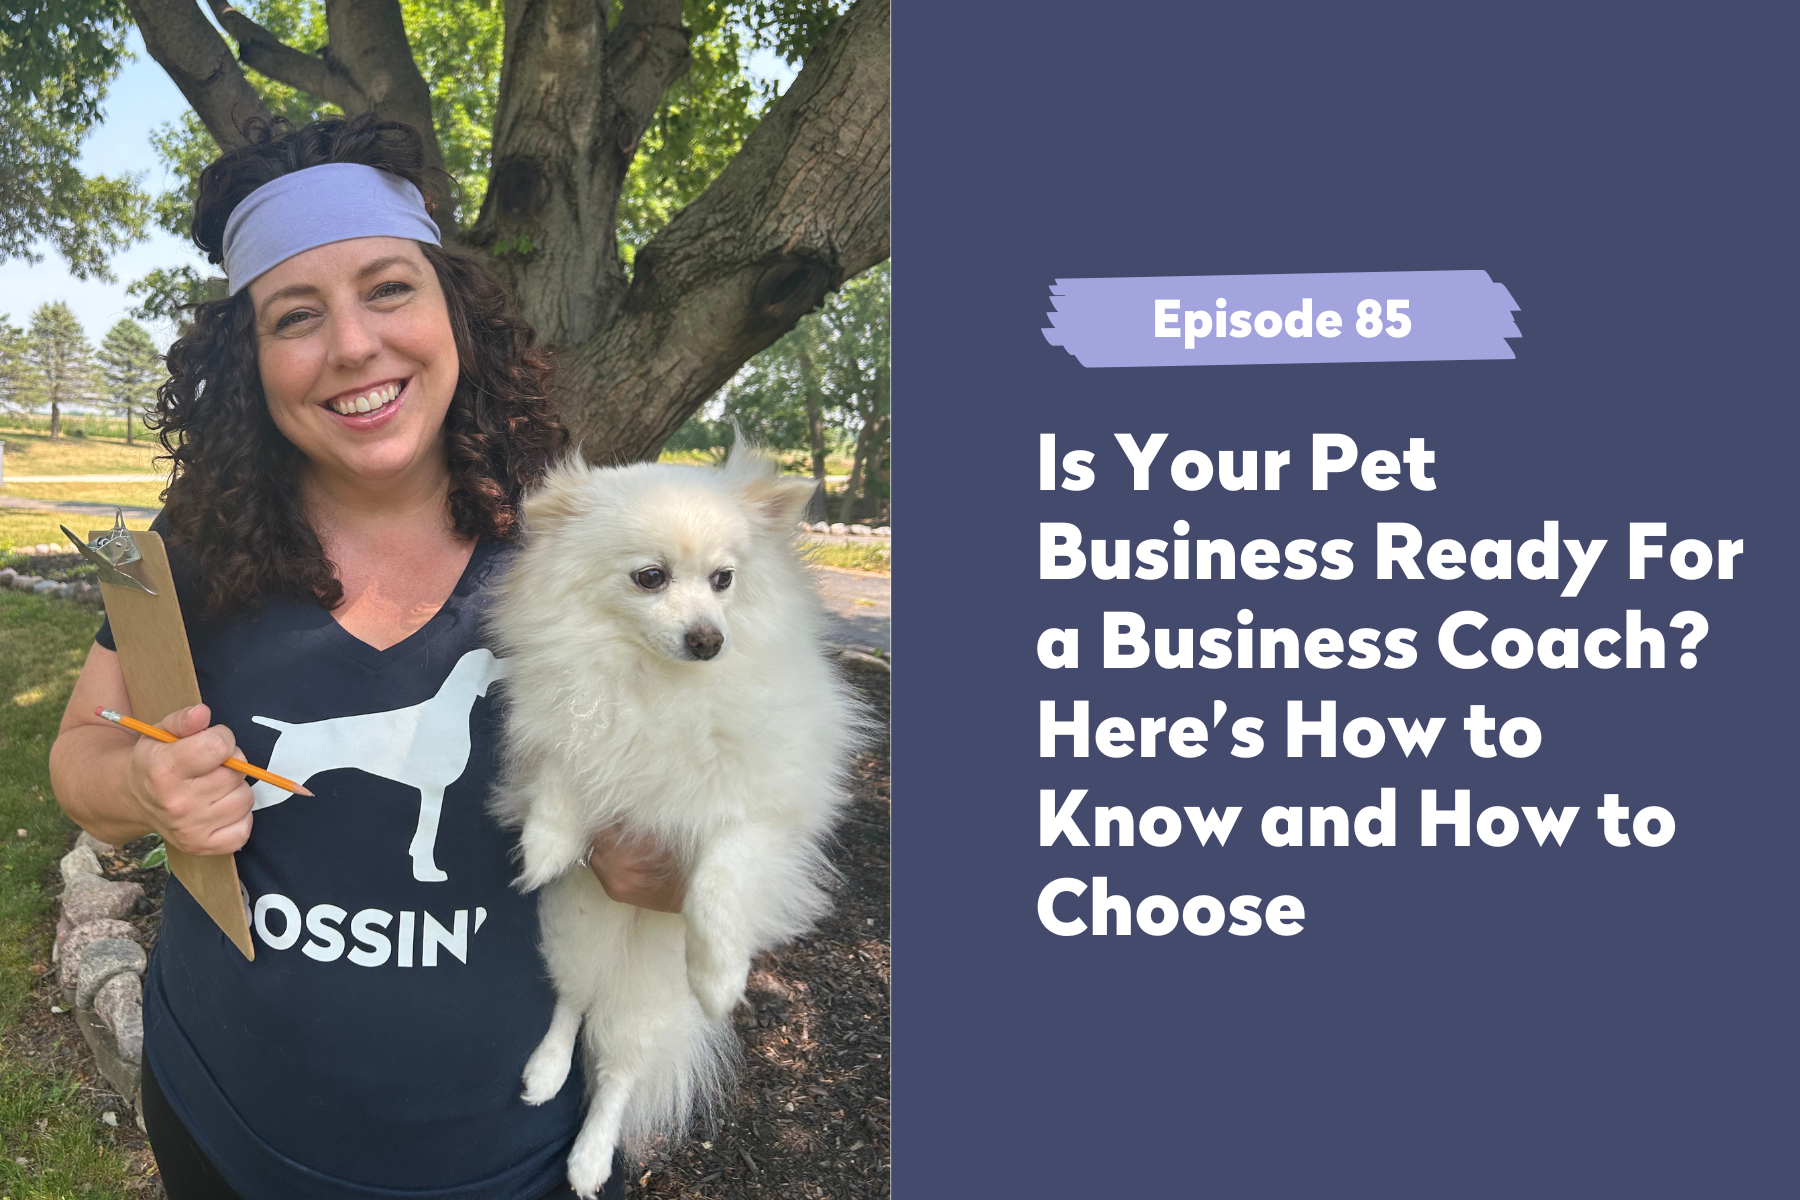 Episode 85: Is Your Pet Business Ready For a Business Coach? Here’s How to Know and How to Choose